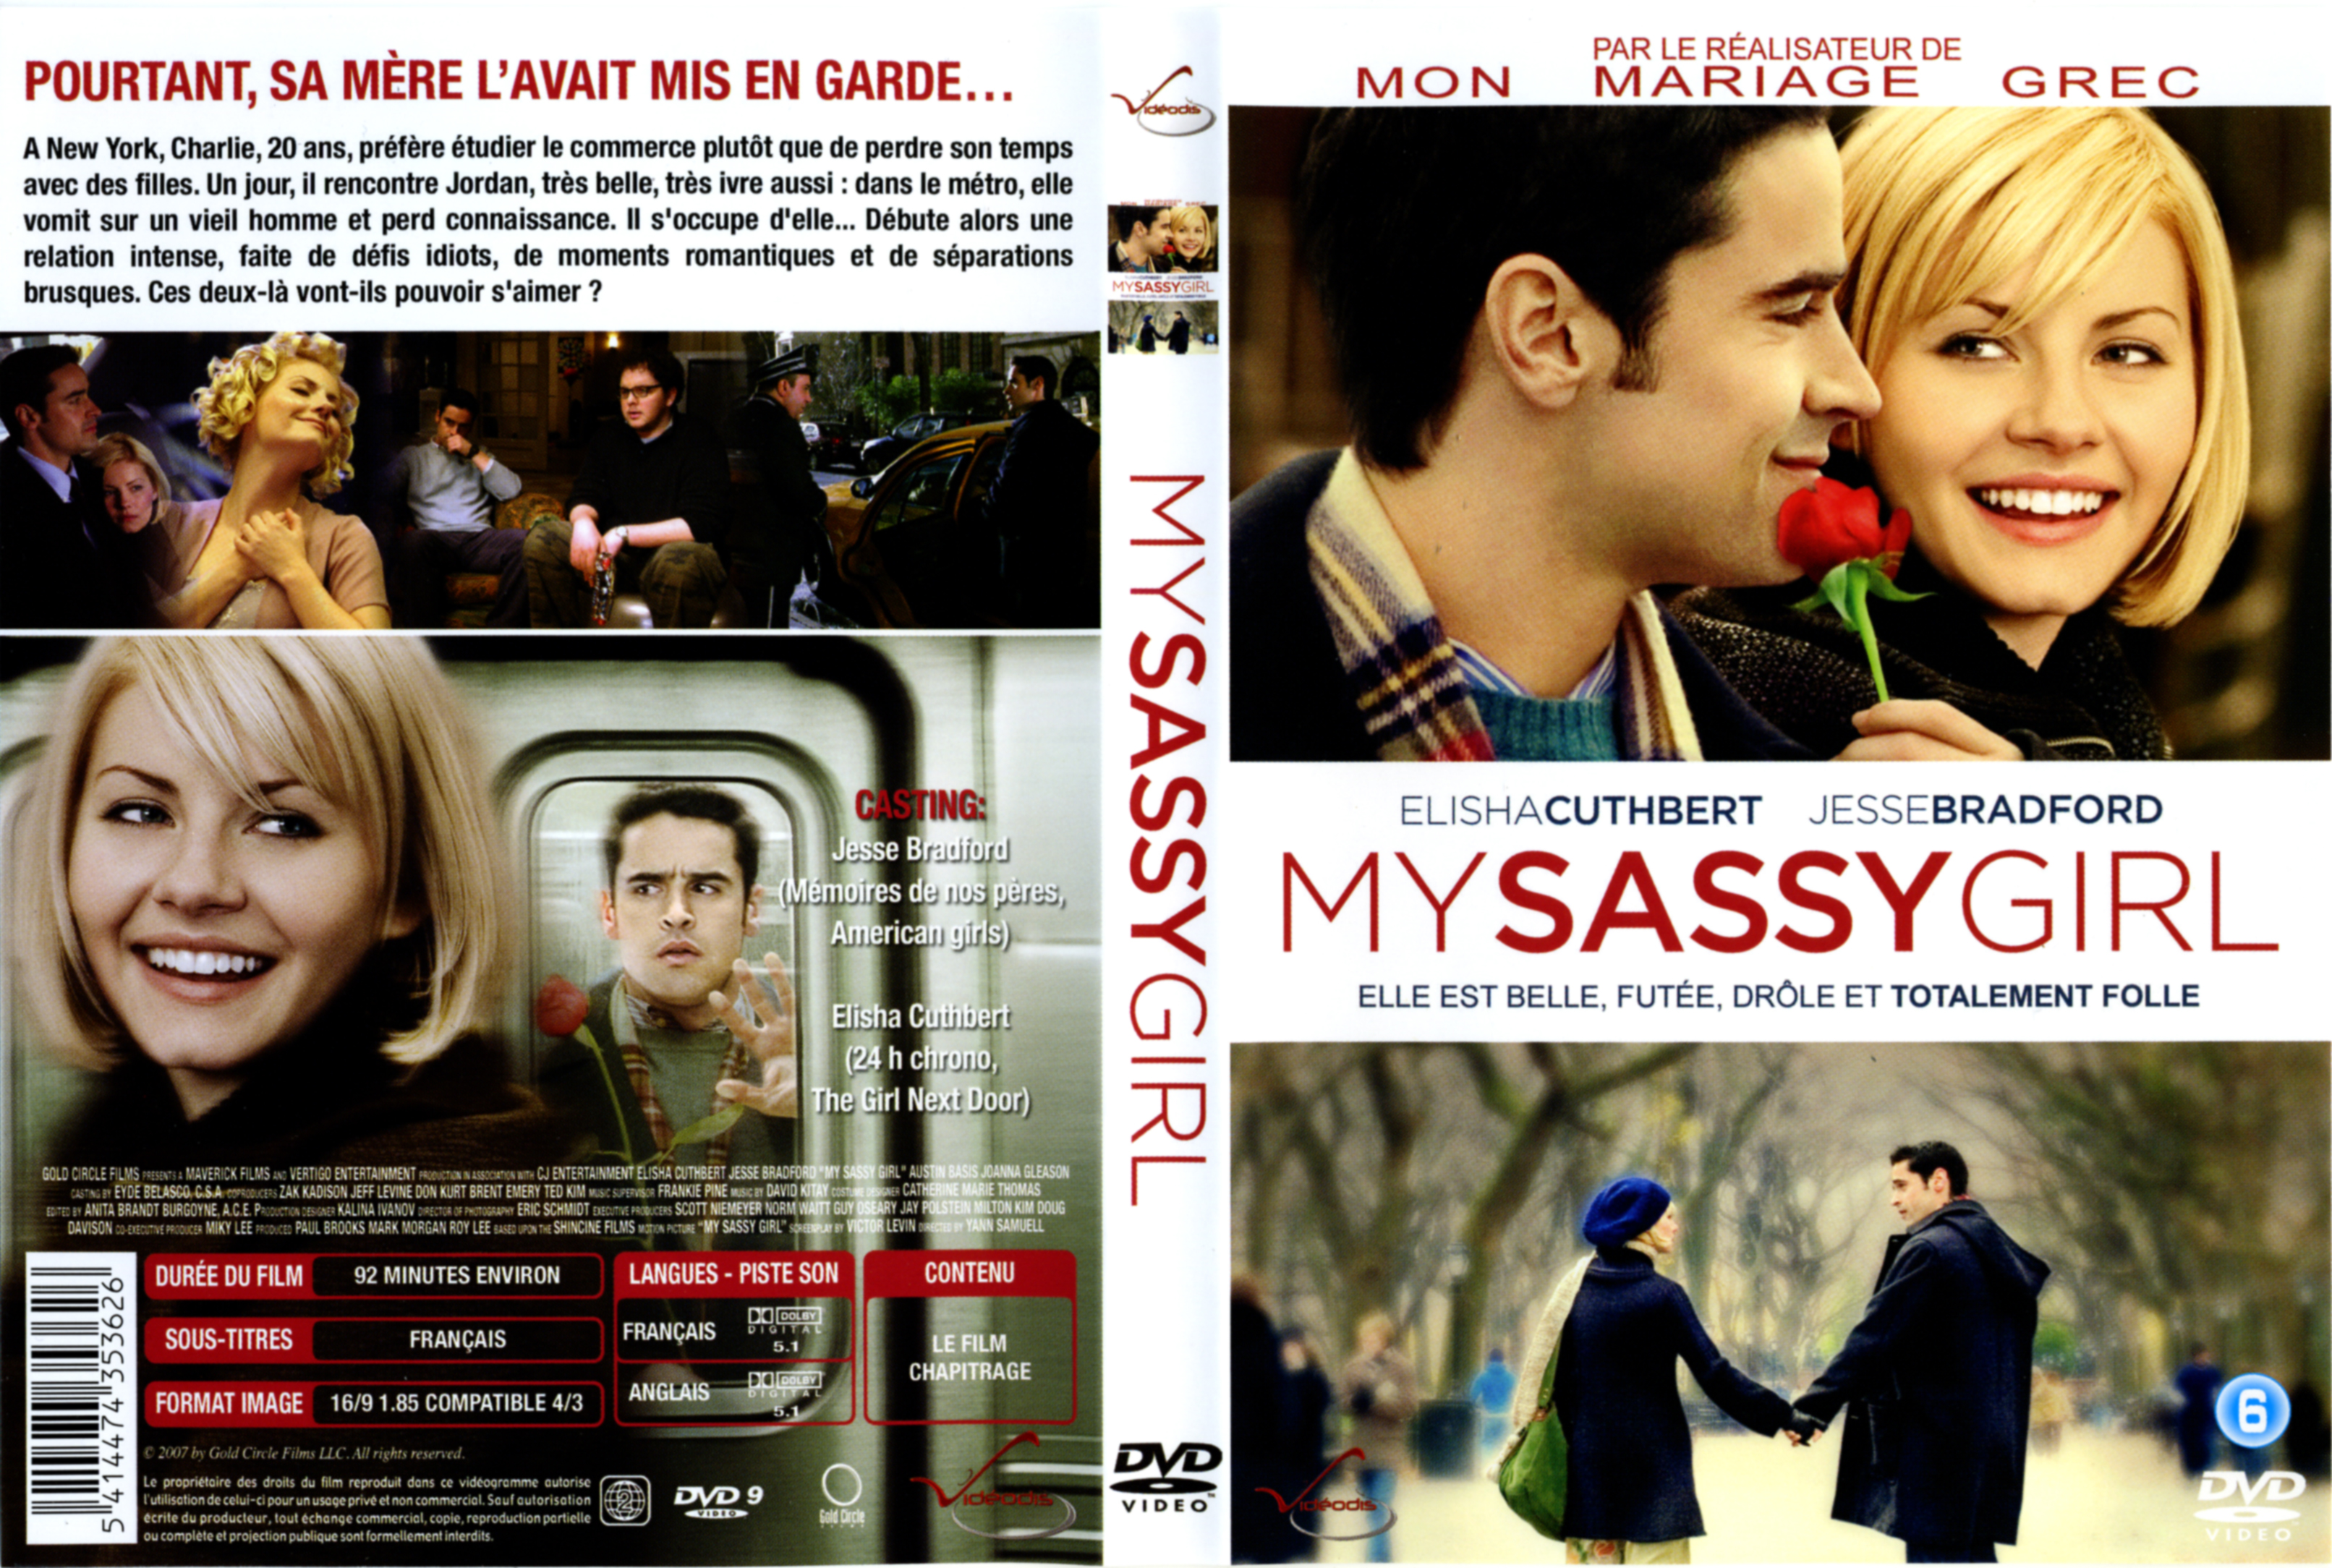 Jaquette DVD My Sassy Girl (2008)